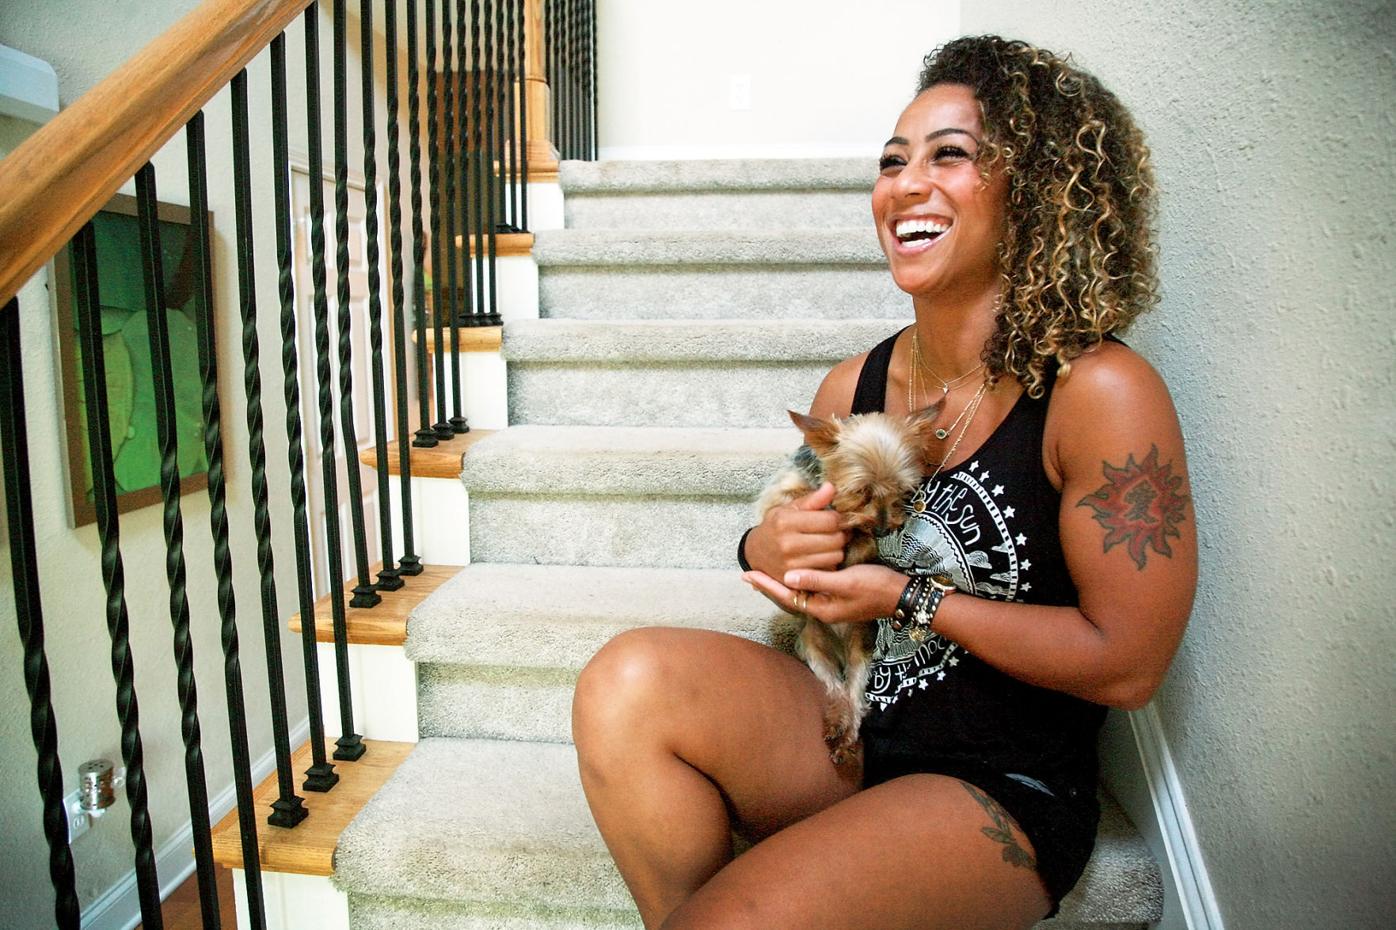 What is hoopz doing now